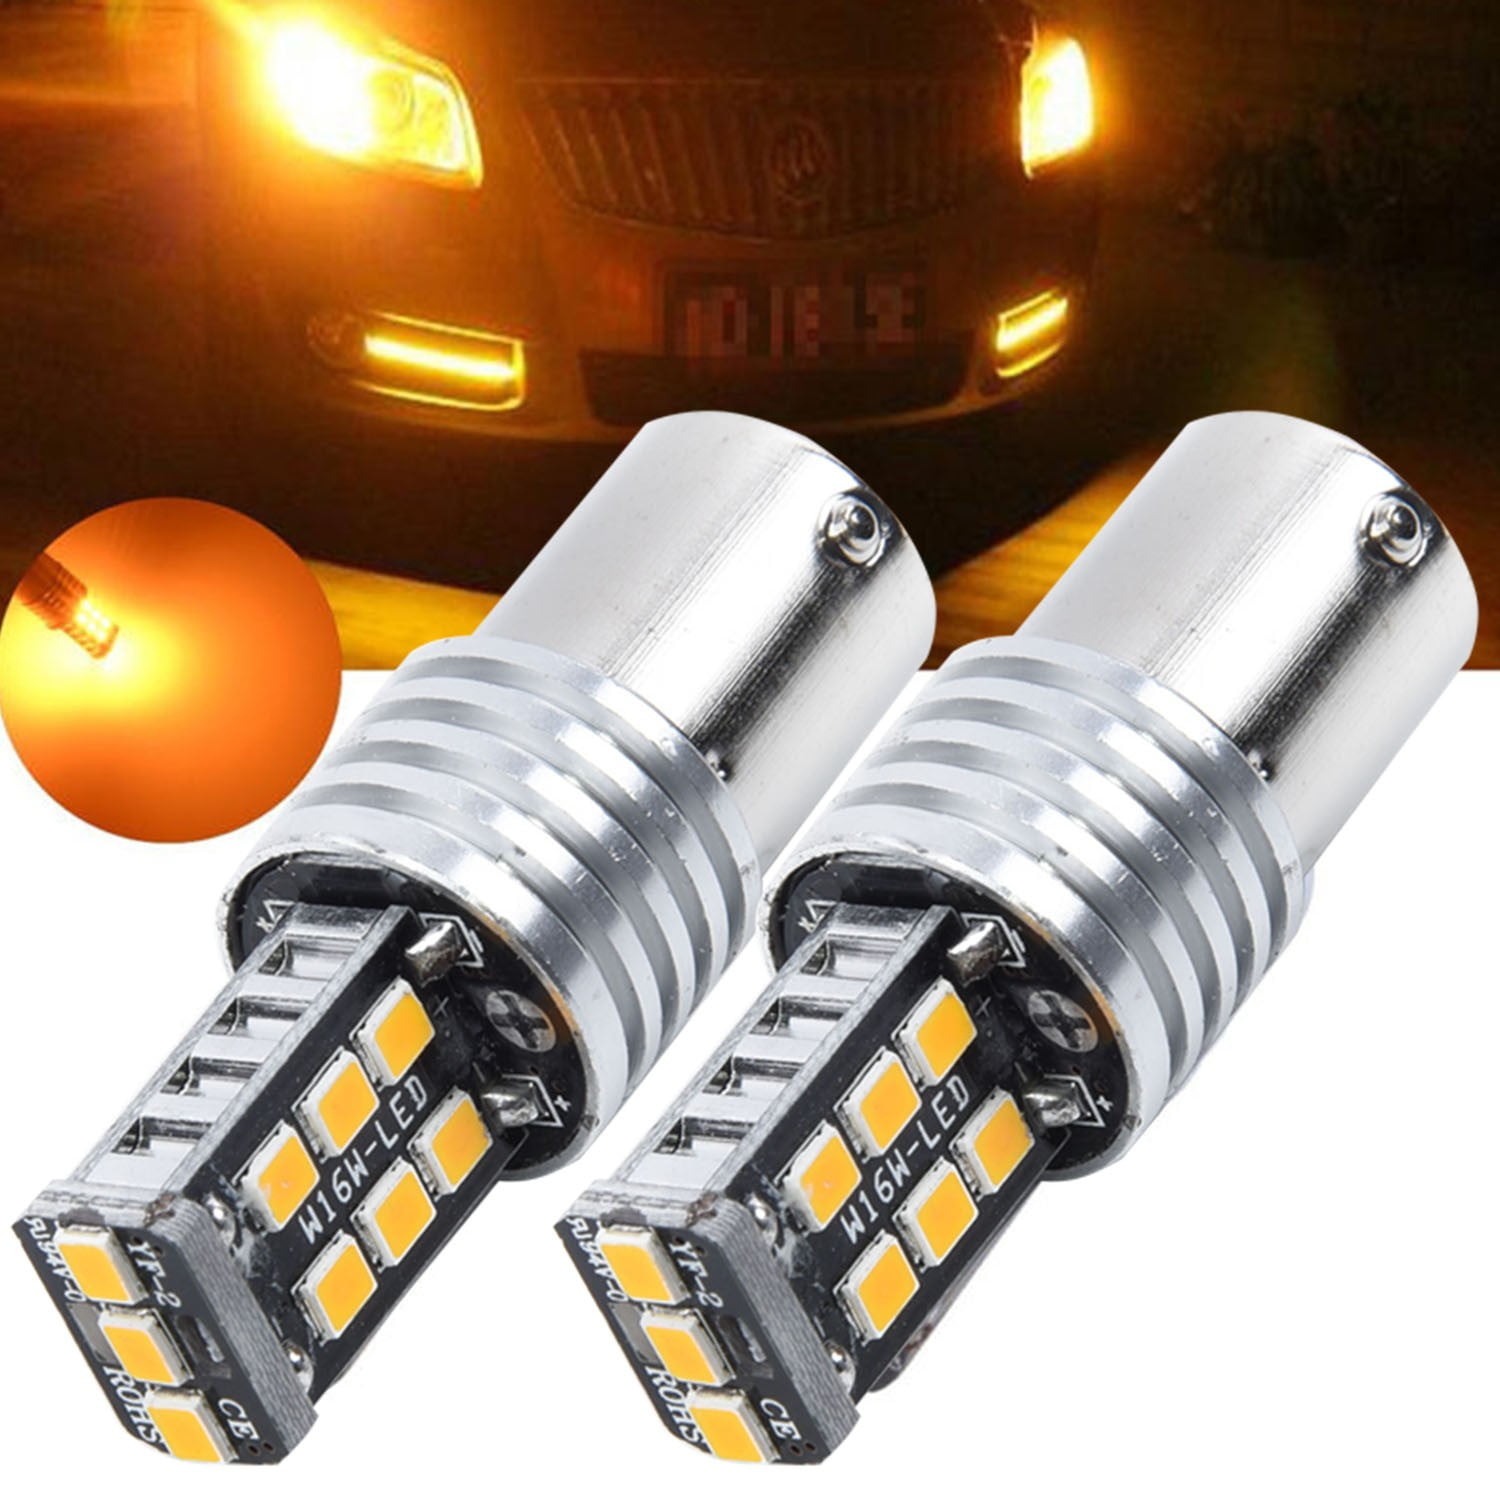 LED Light 5W 1156 Amber Orange Two Bulbs Front Turn Signal Replace Lamp Upgrade